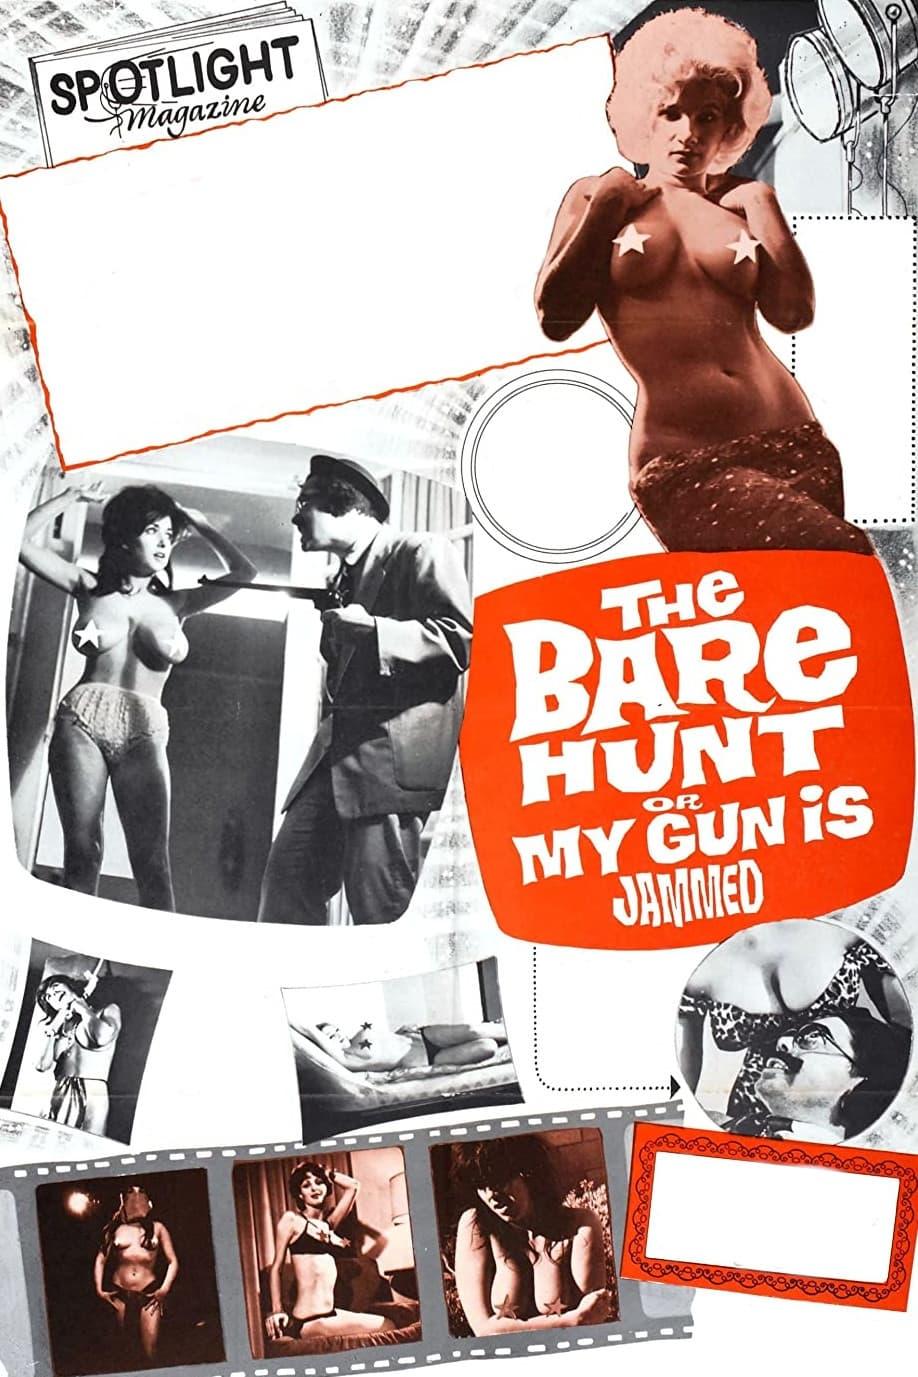 The Bare Hunt, or My Gun Is Jammed poster